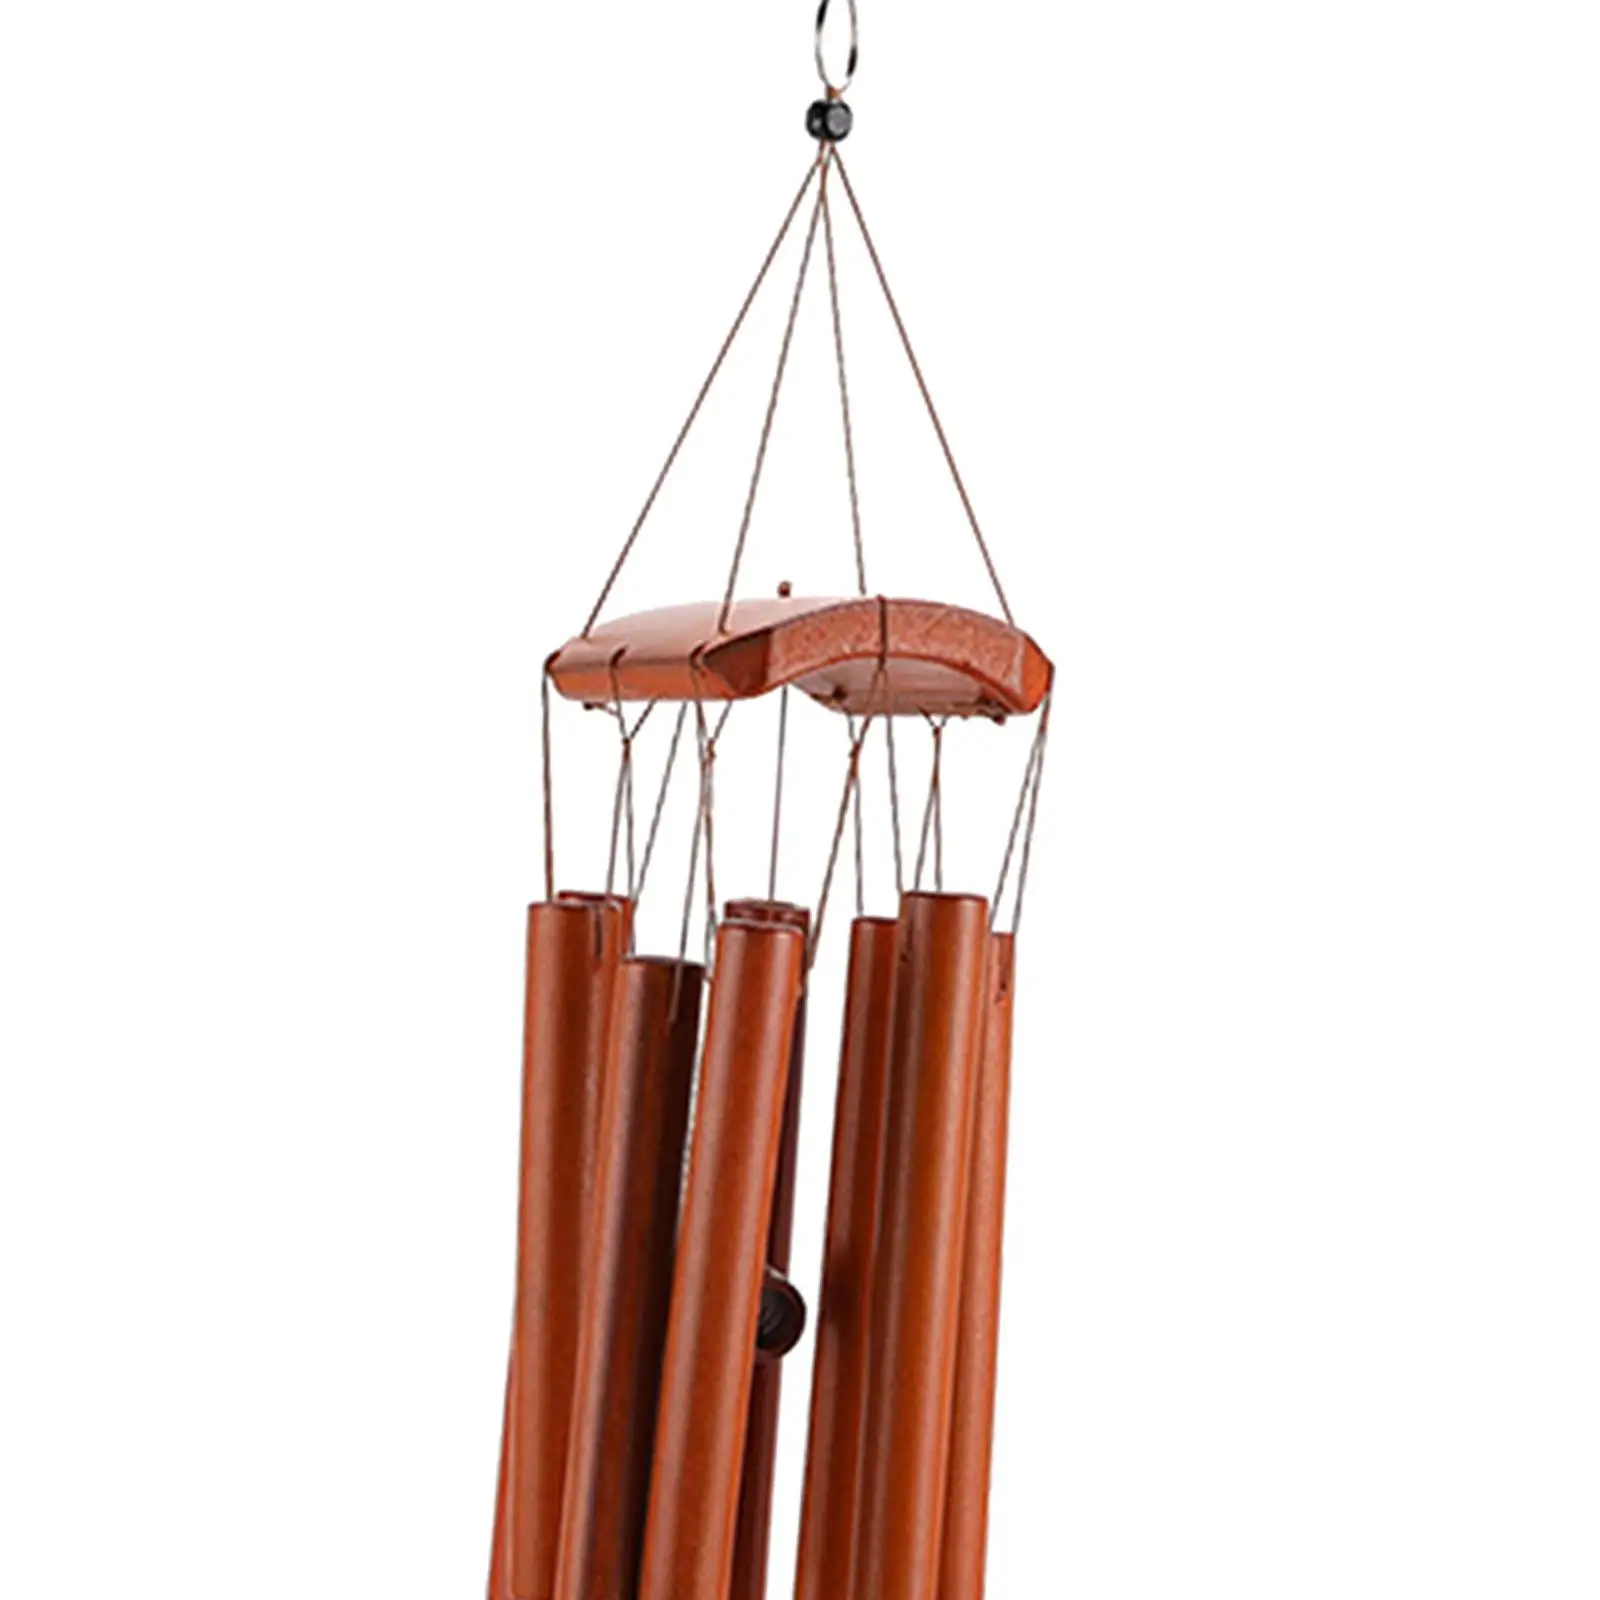 Wooden Wind Chime Bamboo Chime Bell Pendant Simple Hanging Garden Wind Chime Wind Bell for Garden Balcony Patio Yard Indoor